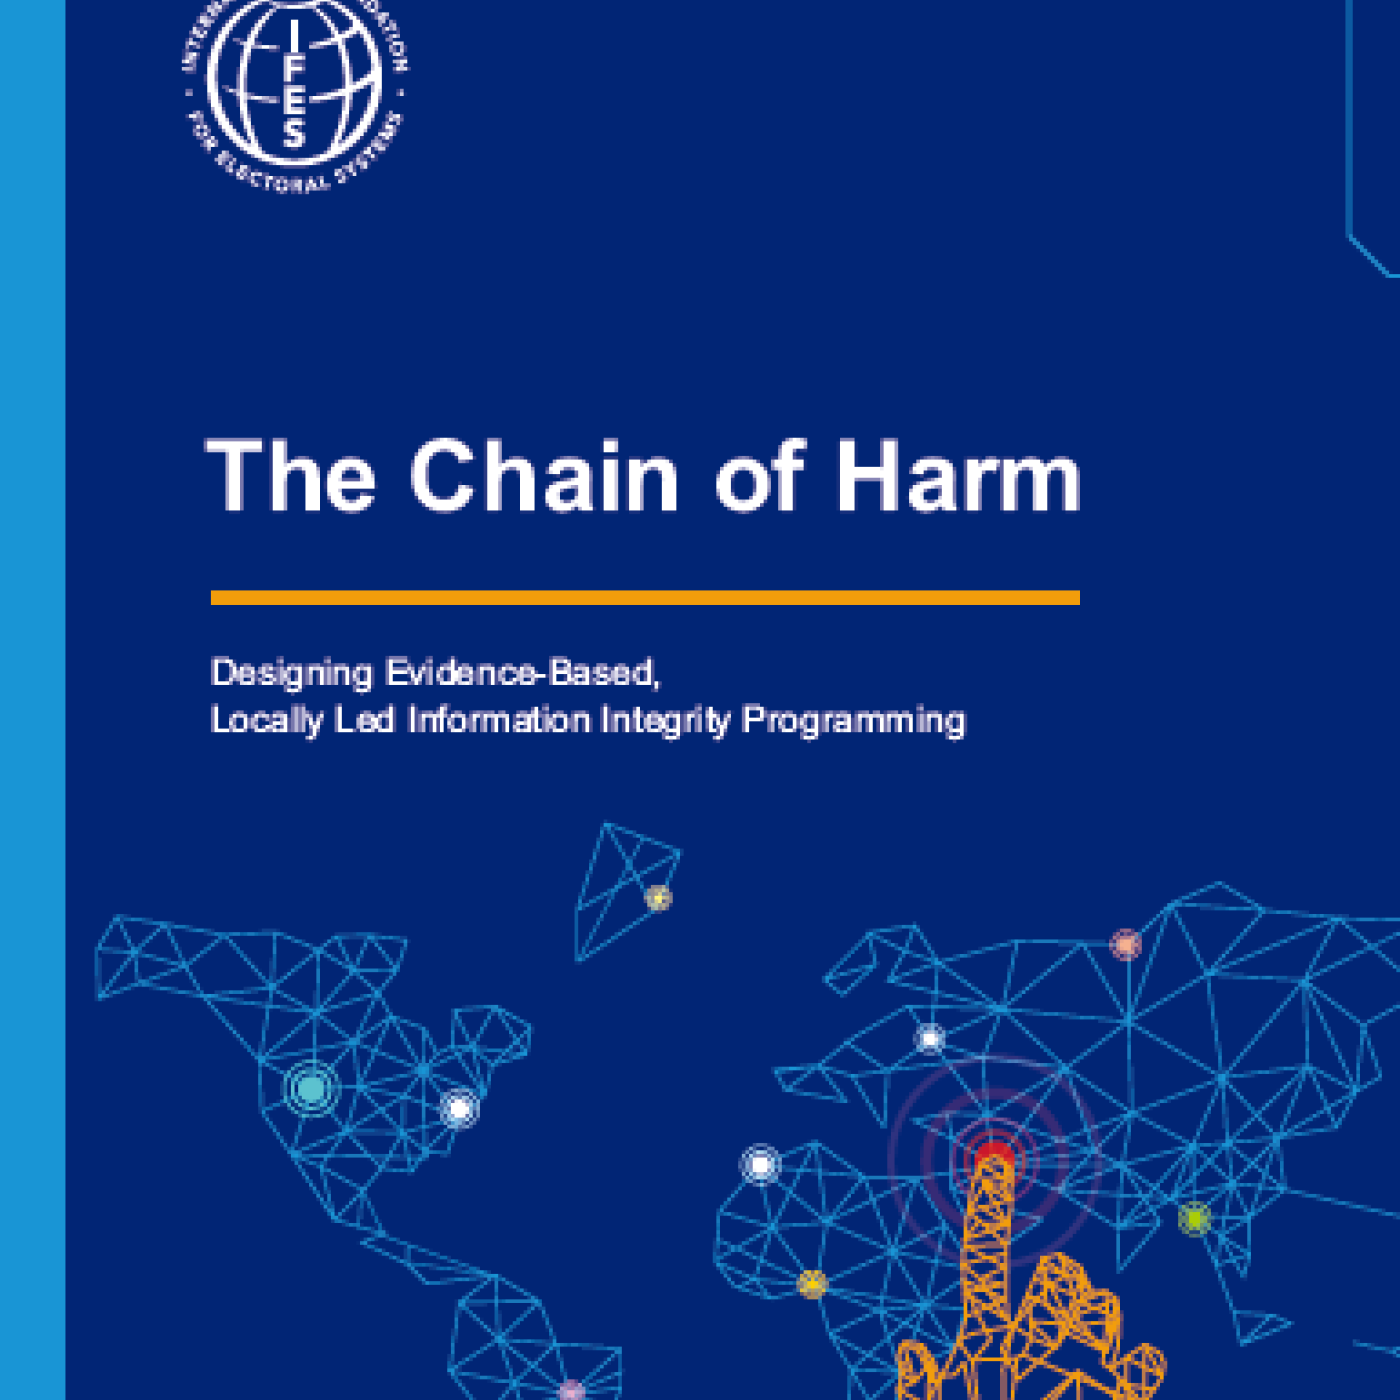  Chain of Harm-Designing Evidence Based, Locally Led Information Integrity Programming